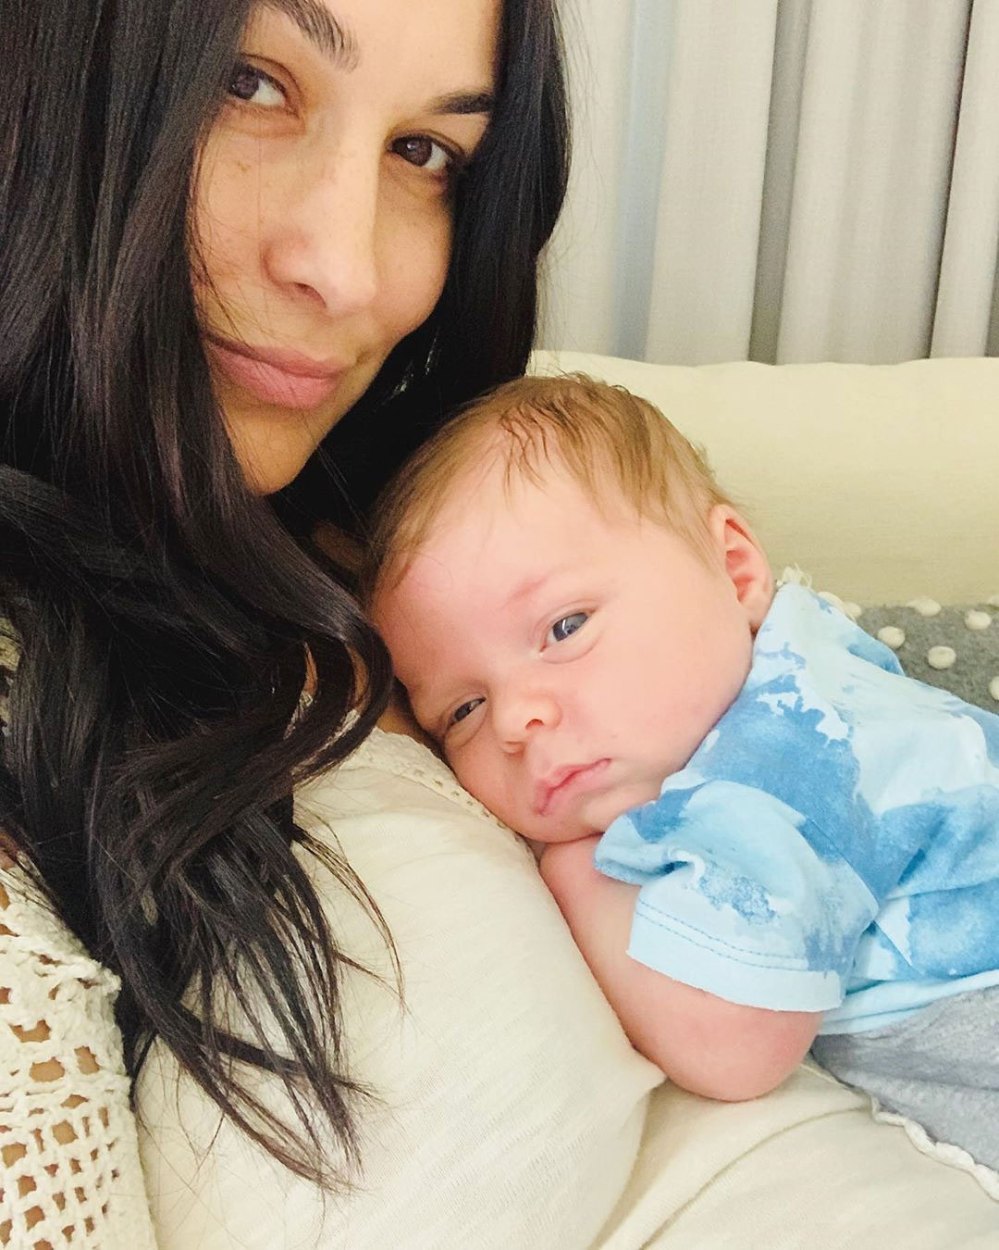 Brie Bella Is 13 Pounds Away From Pre-Baby Weight 5 Weeks After Son Buddy Birth